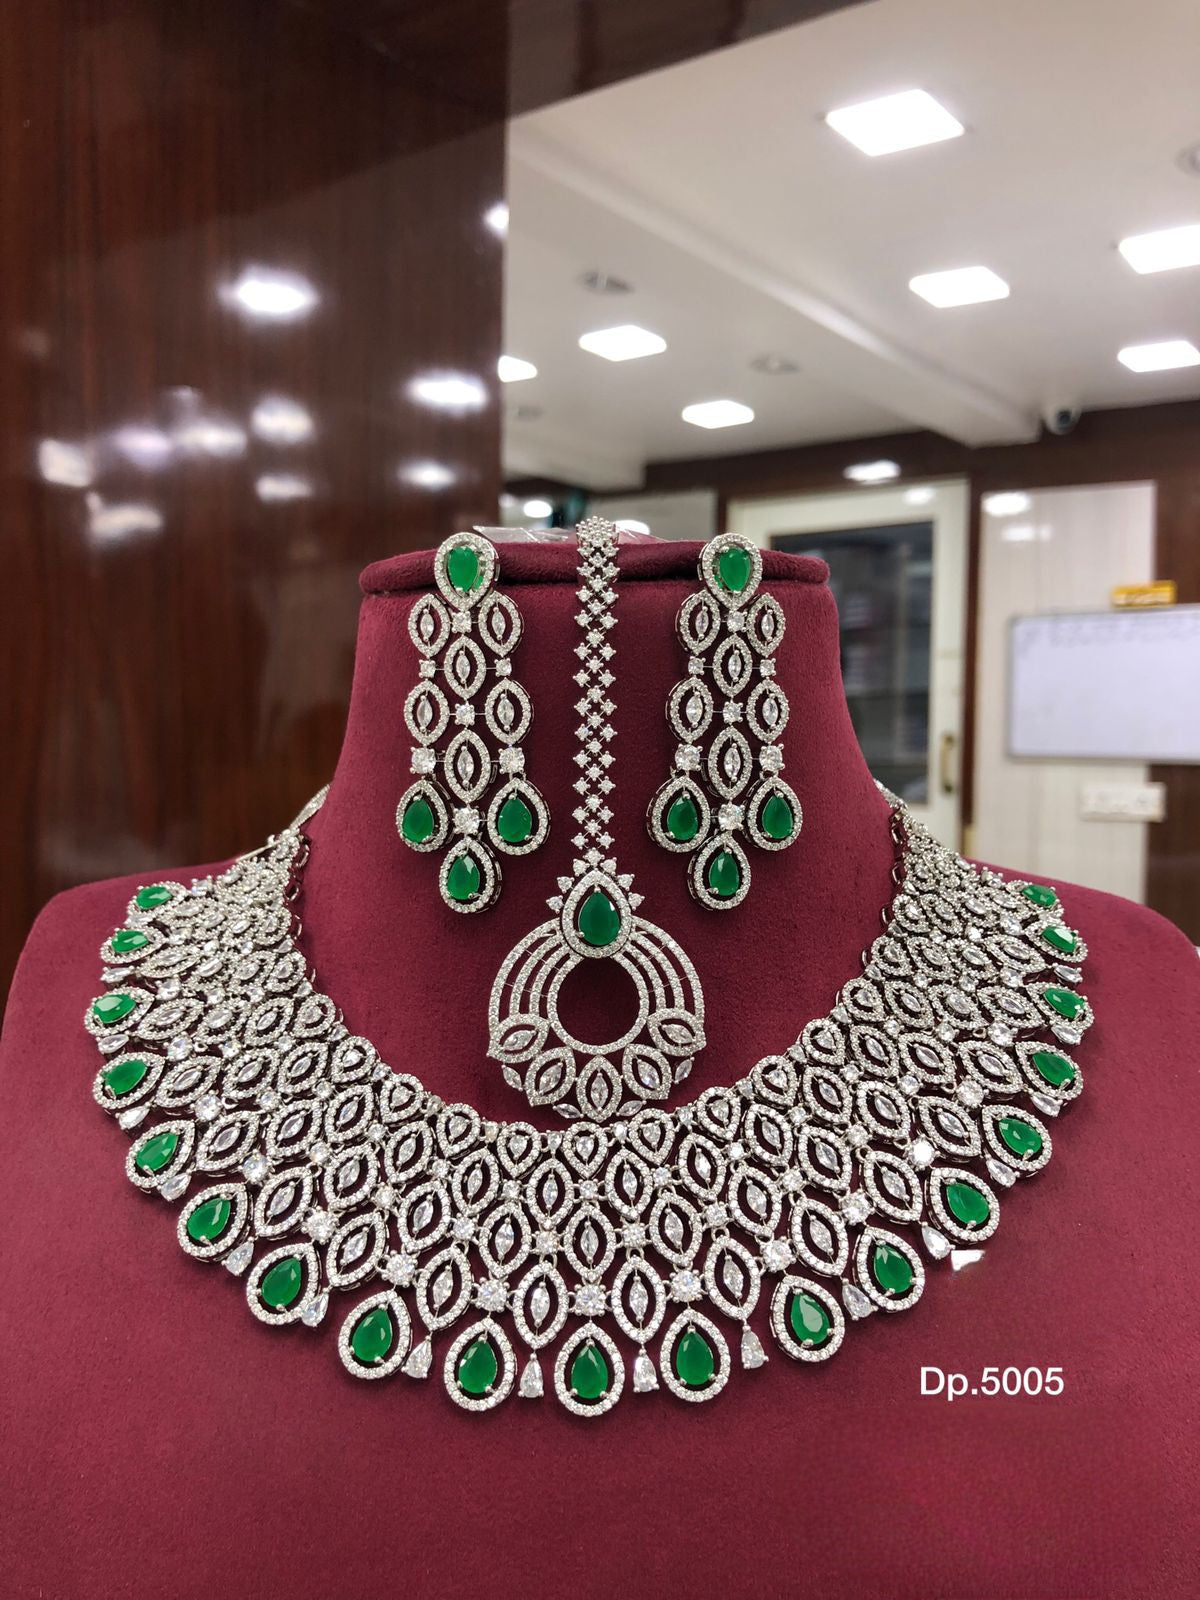 High Quality American diamond Full-bridal Necklace With Earrings